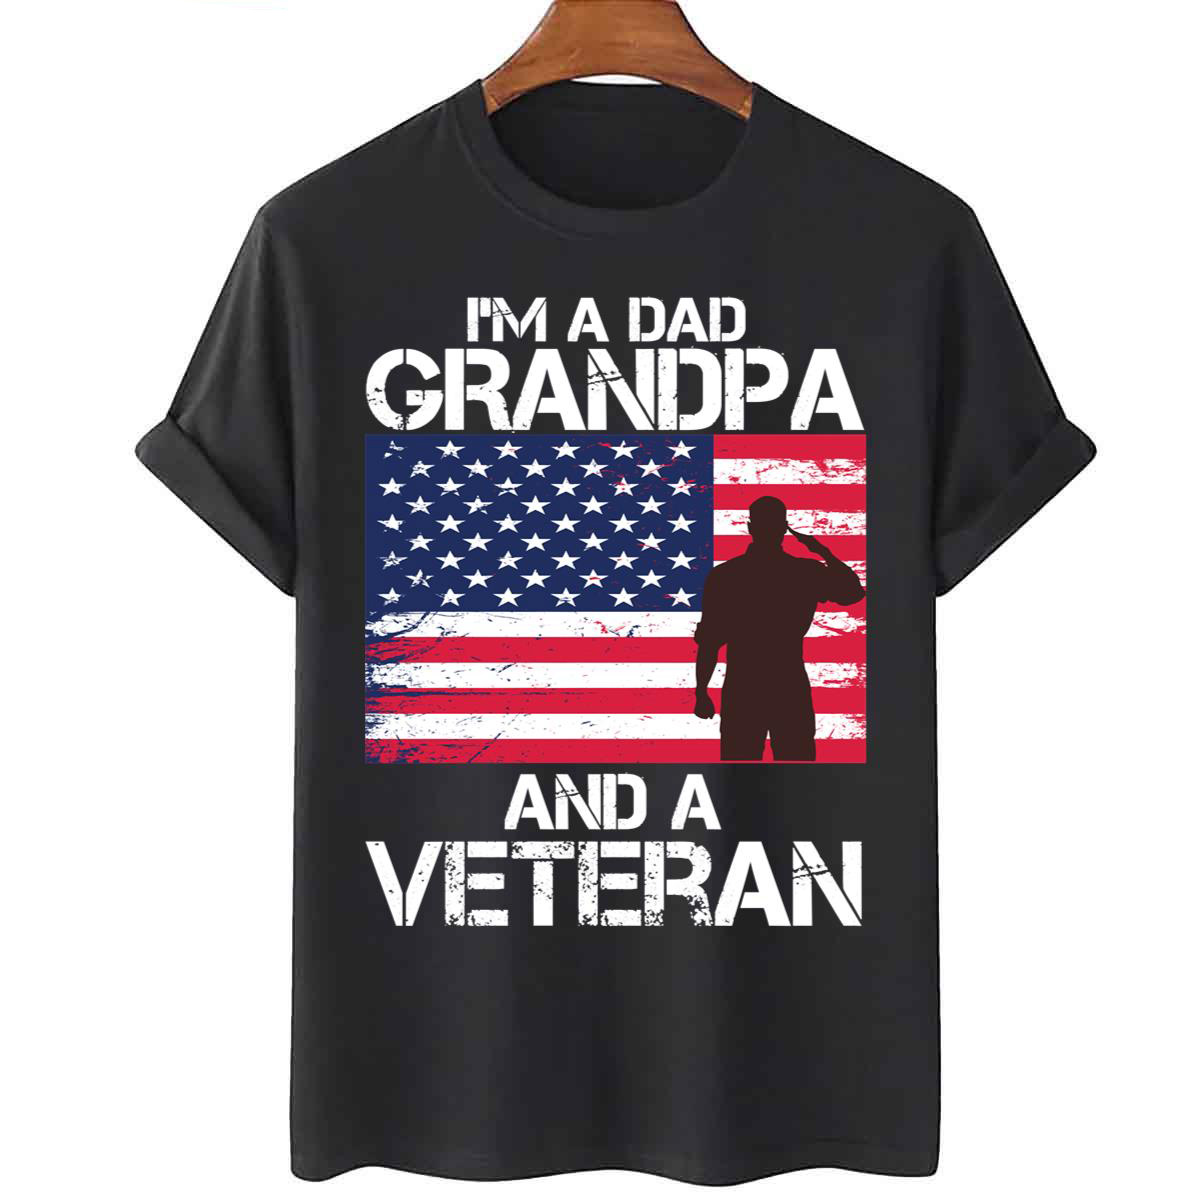 Veteran Dad Shirt Father's Day Gift I'm A Dad Grandpa And A Veteran Nothing Scares Me Sweatshirt Funny Dad Shirt Patriotic Veteran Shirt